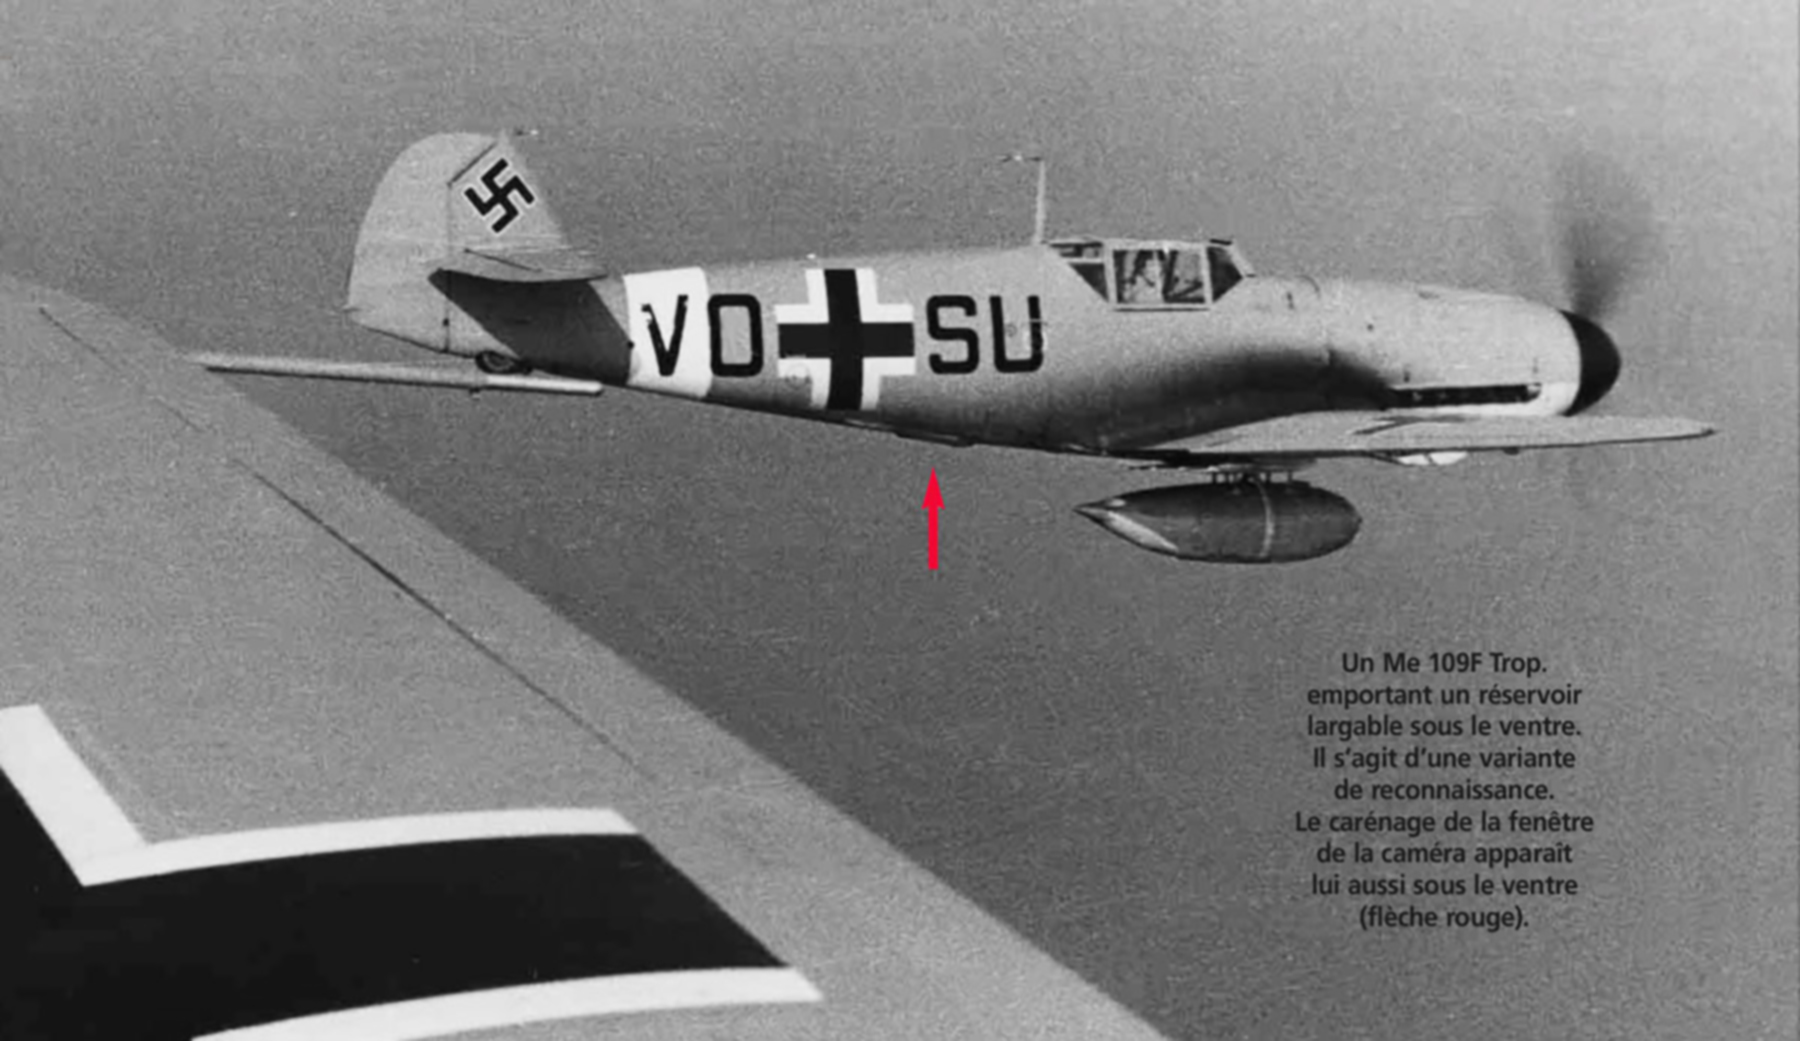 Messerschmitt Bf 109F4Trop Stkz VO+SU may well have ended up as a F6 01